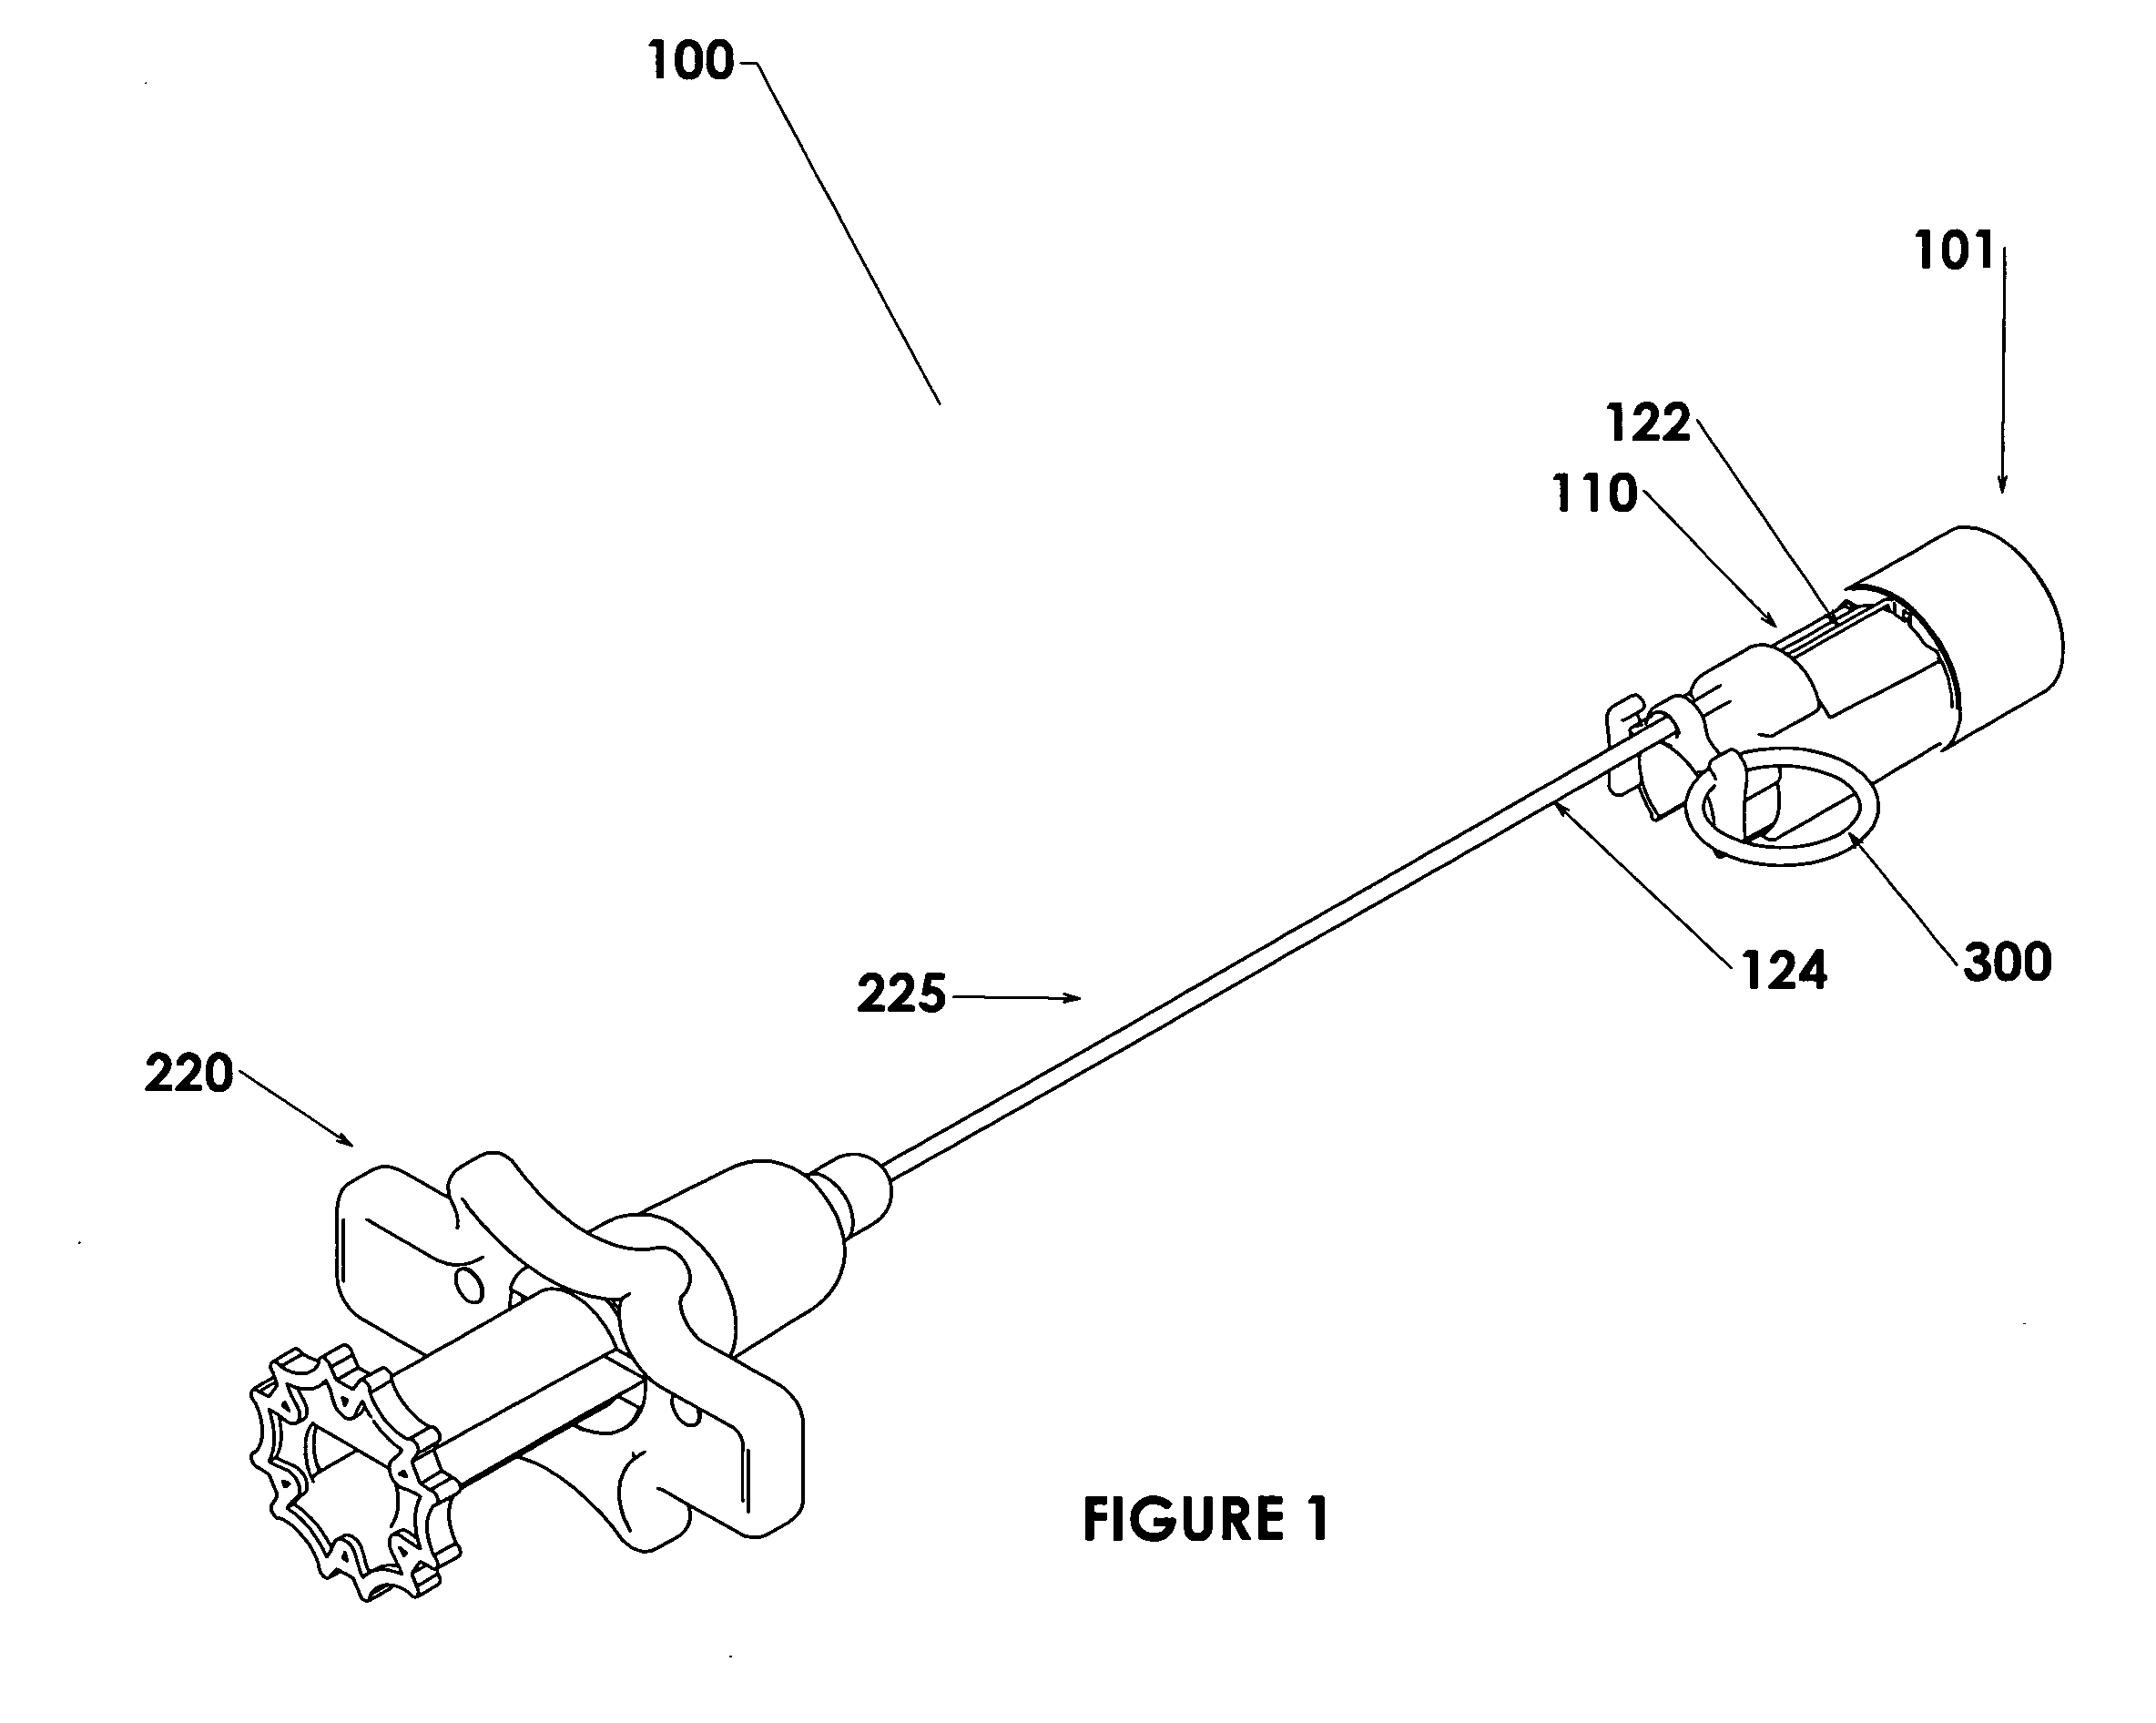 Adapter for attaching devices to endoscopes